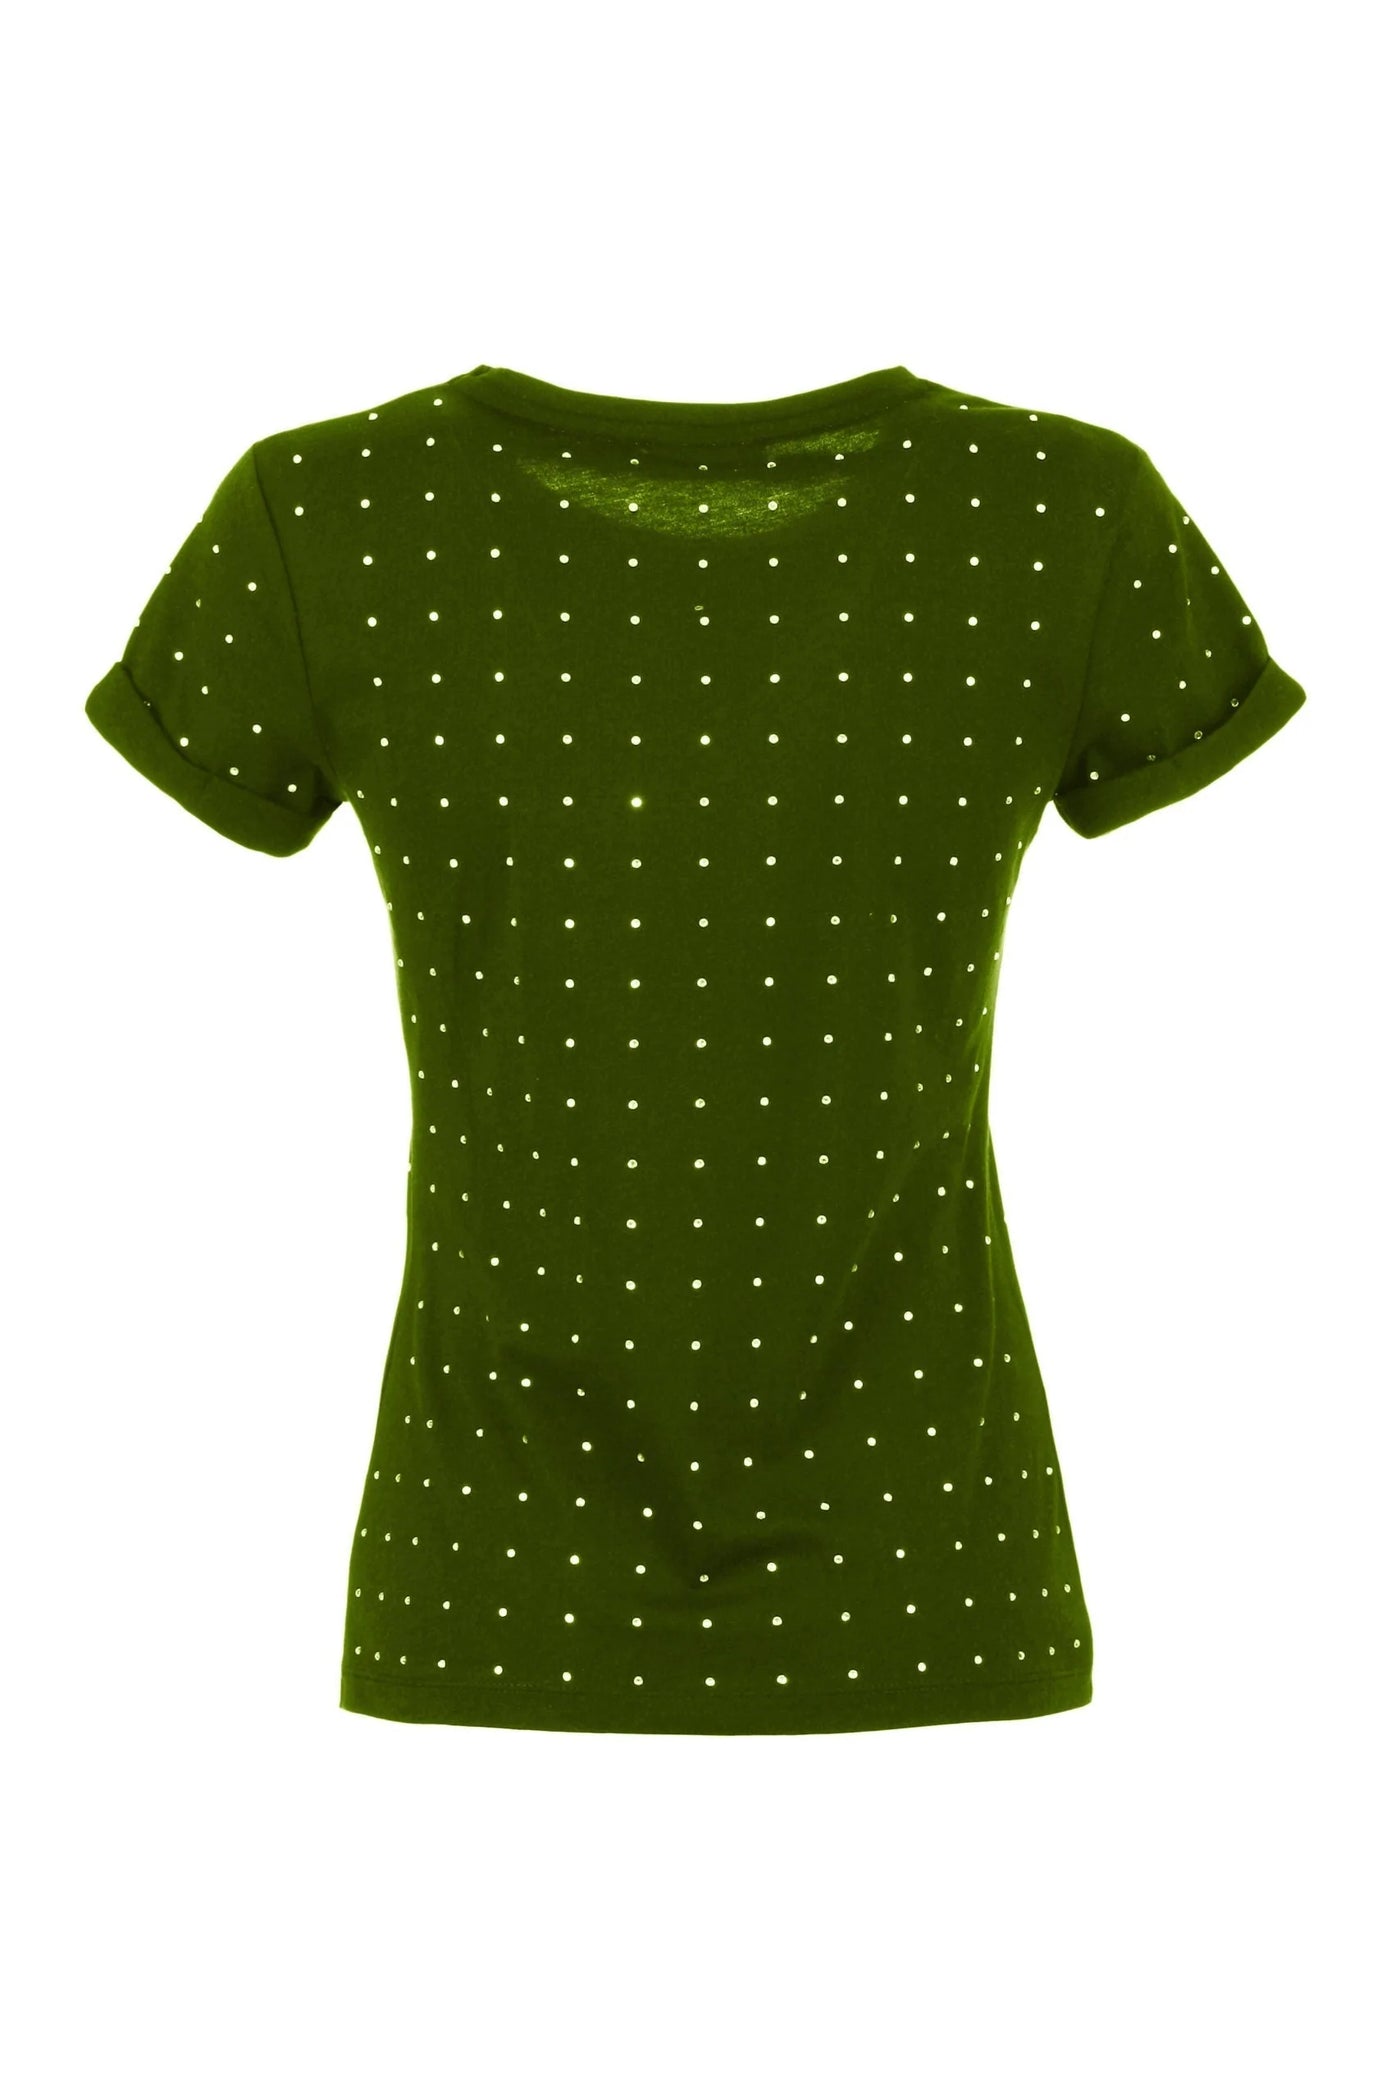 Imperfect strass on all  Tops & T-Shirt feed-agegroup-adult, feed-color-Green, feed-gender-female, Green, Imperfect, S, Tops & T-Shirts - Women - Clothing, XS at SEYMAYKA